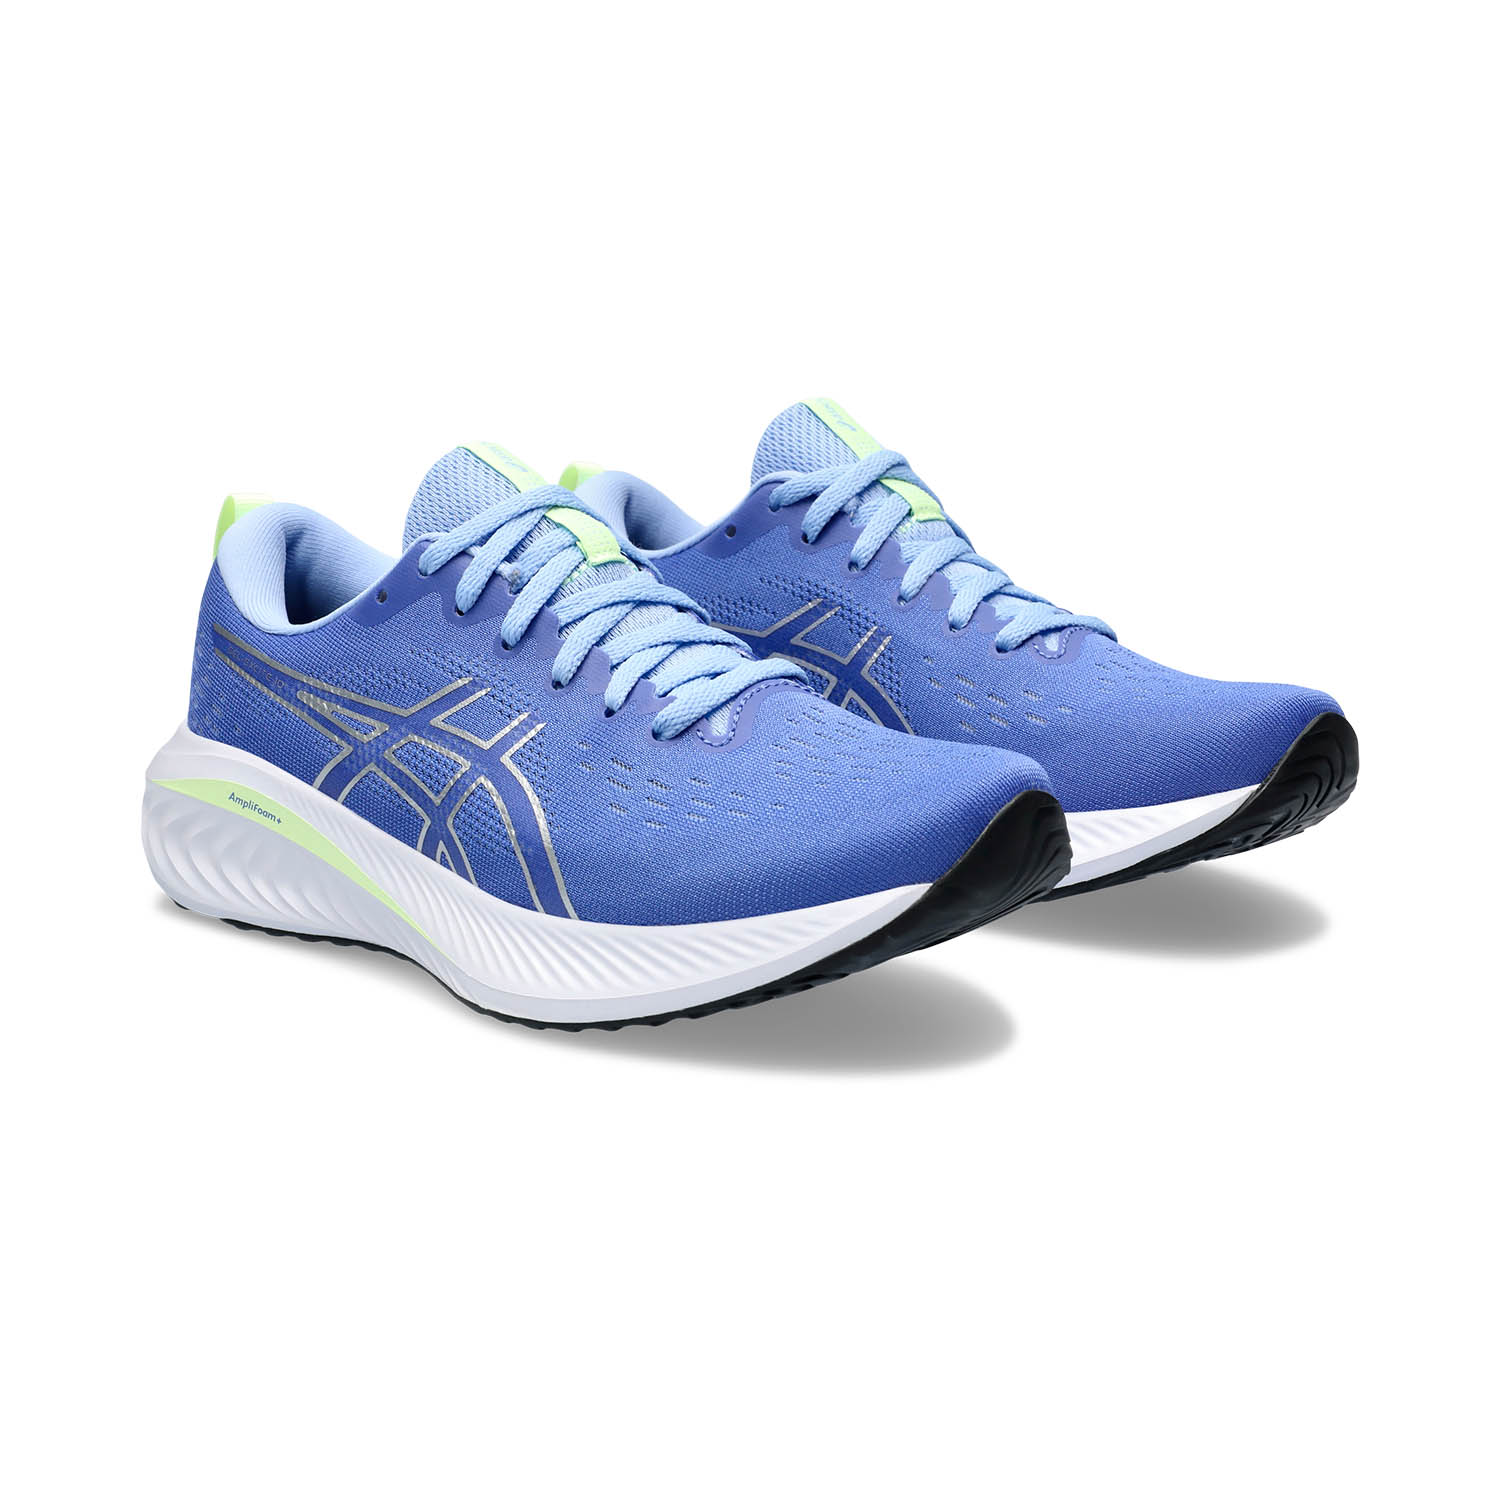 Asics Gel Excite 10 - Sapphire/Pure Silver